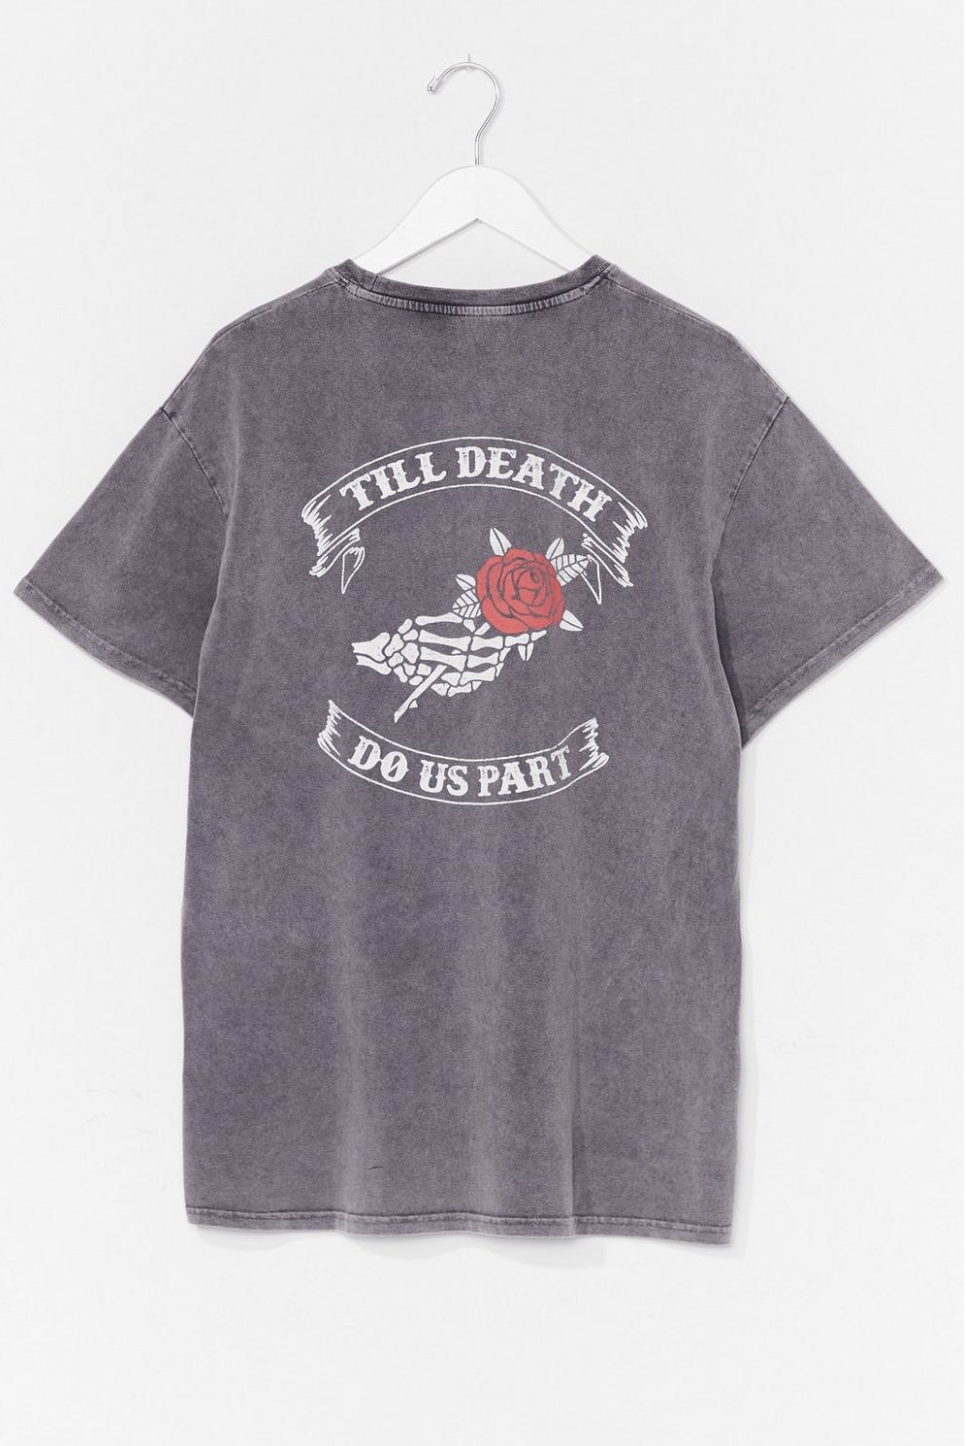 A grey T-shirt of a skeleton handing holding a rose. &quot;Till Death Do Us Part&quot; is printed in white font. 